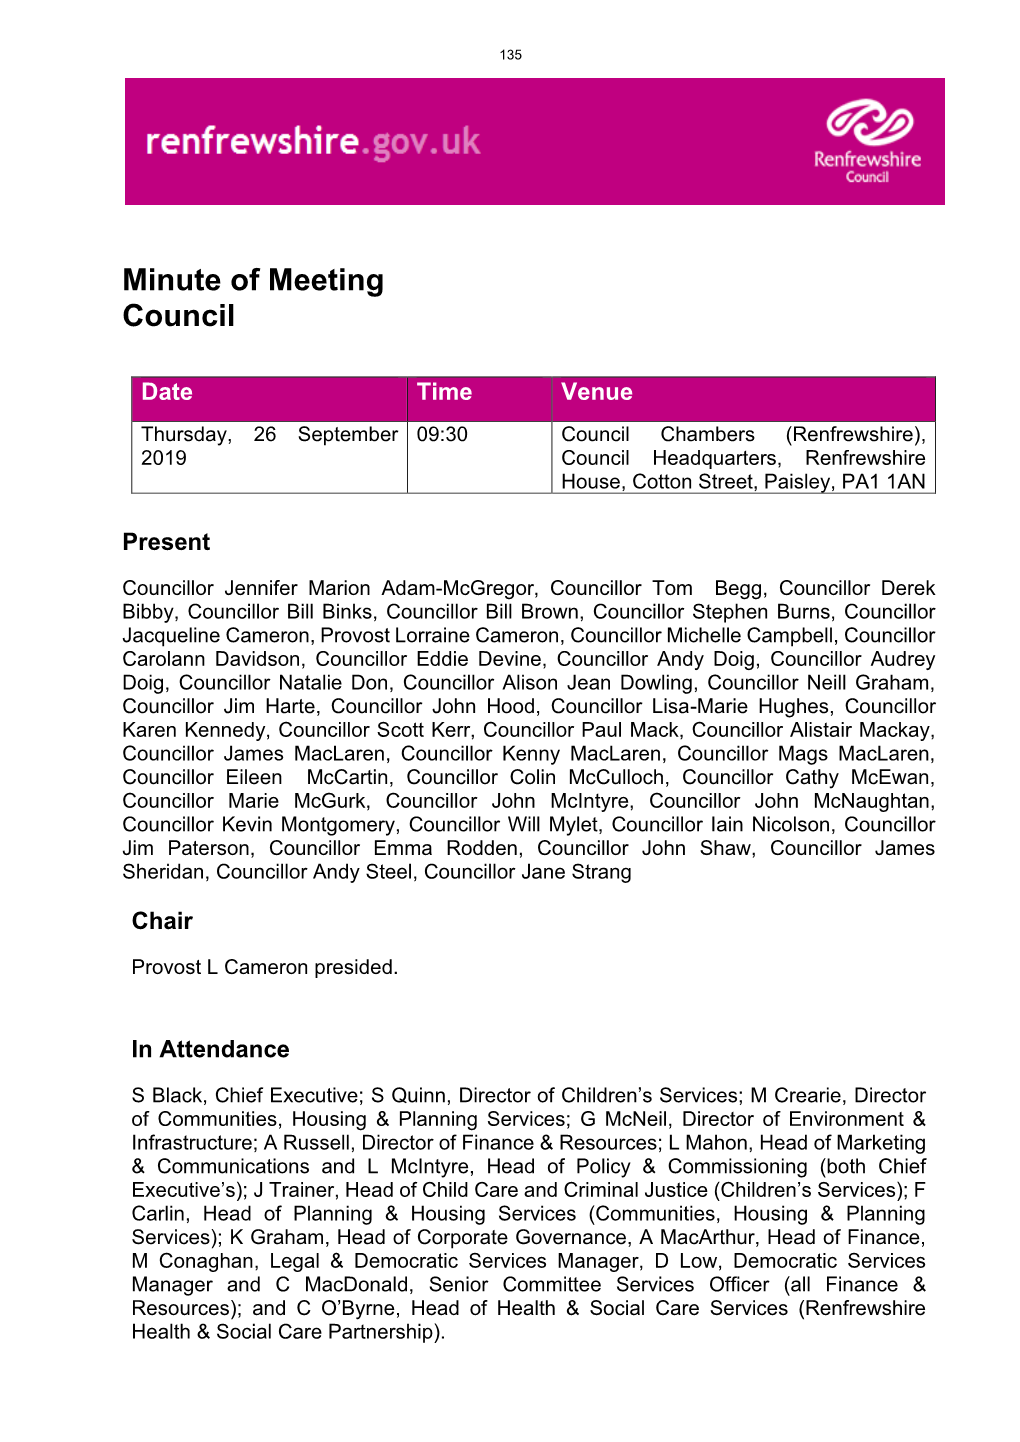 Minute of Meeting Council